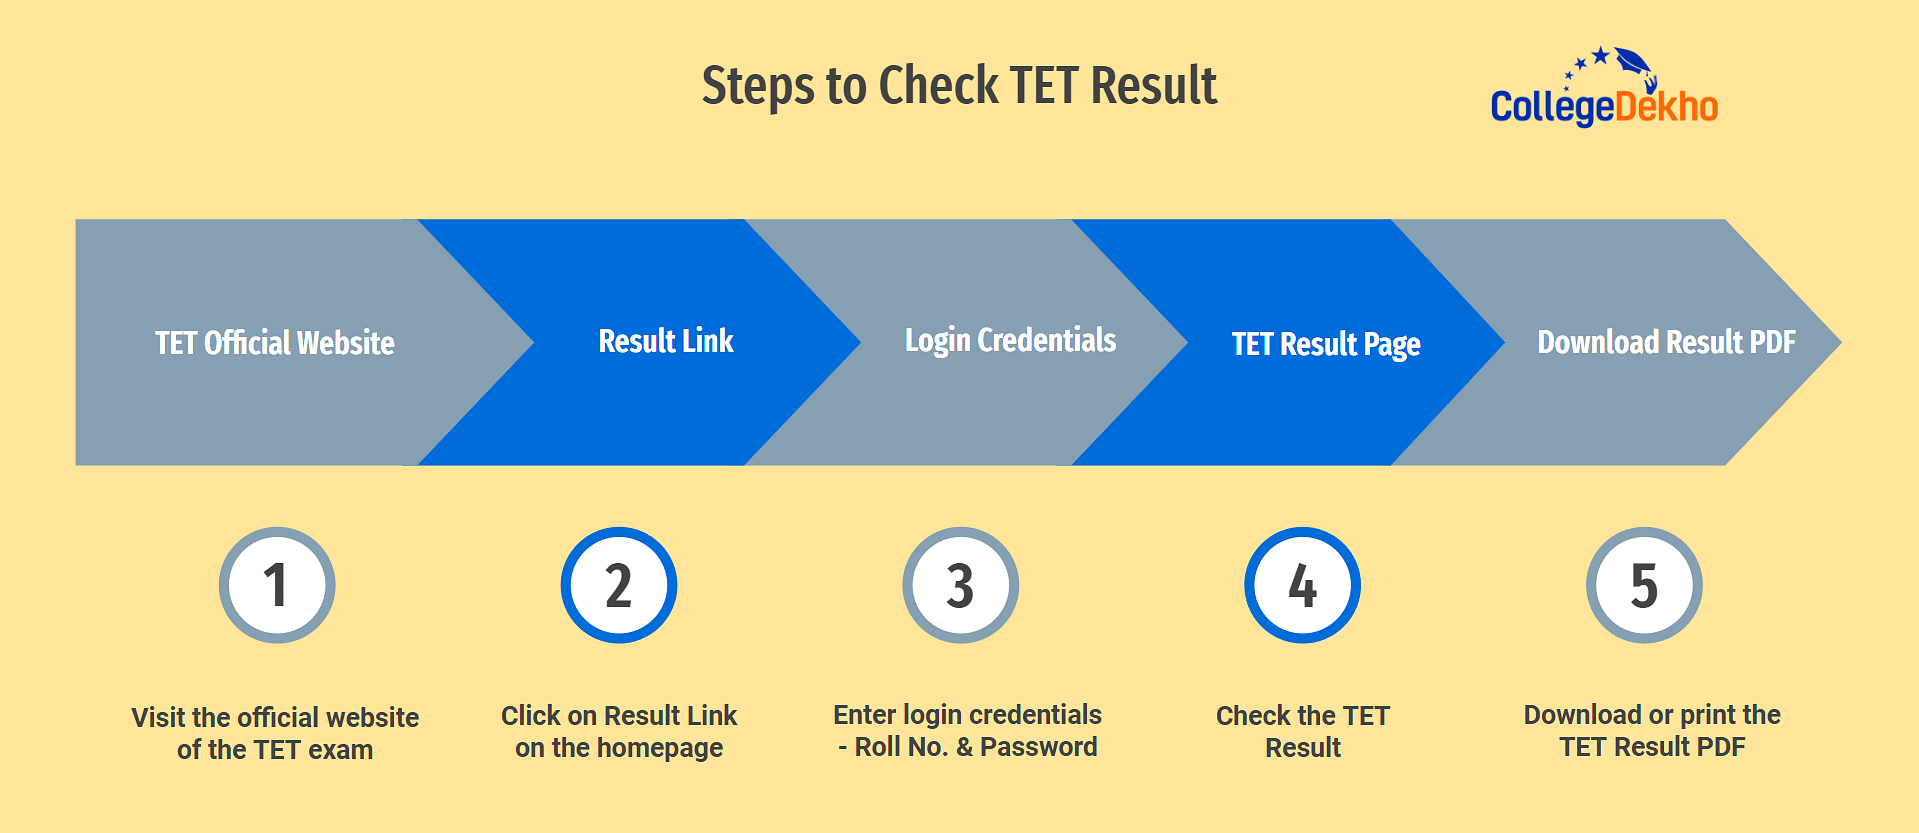 Steps to Check TET Result